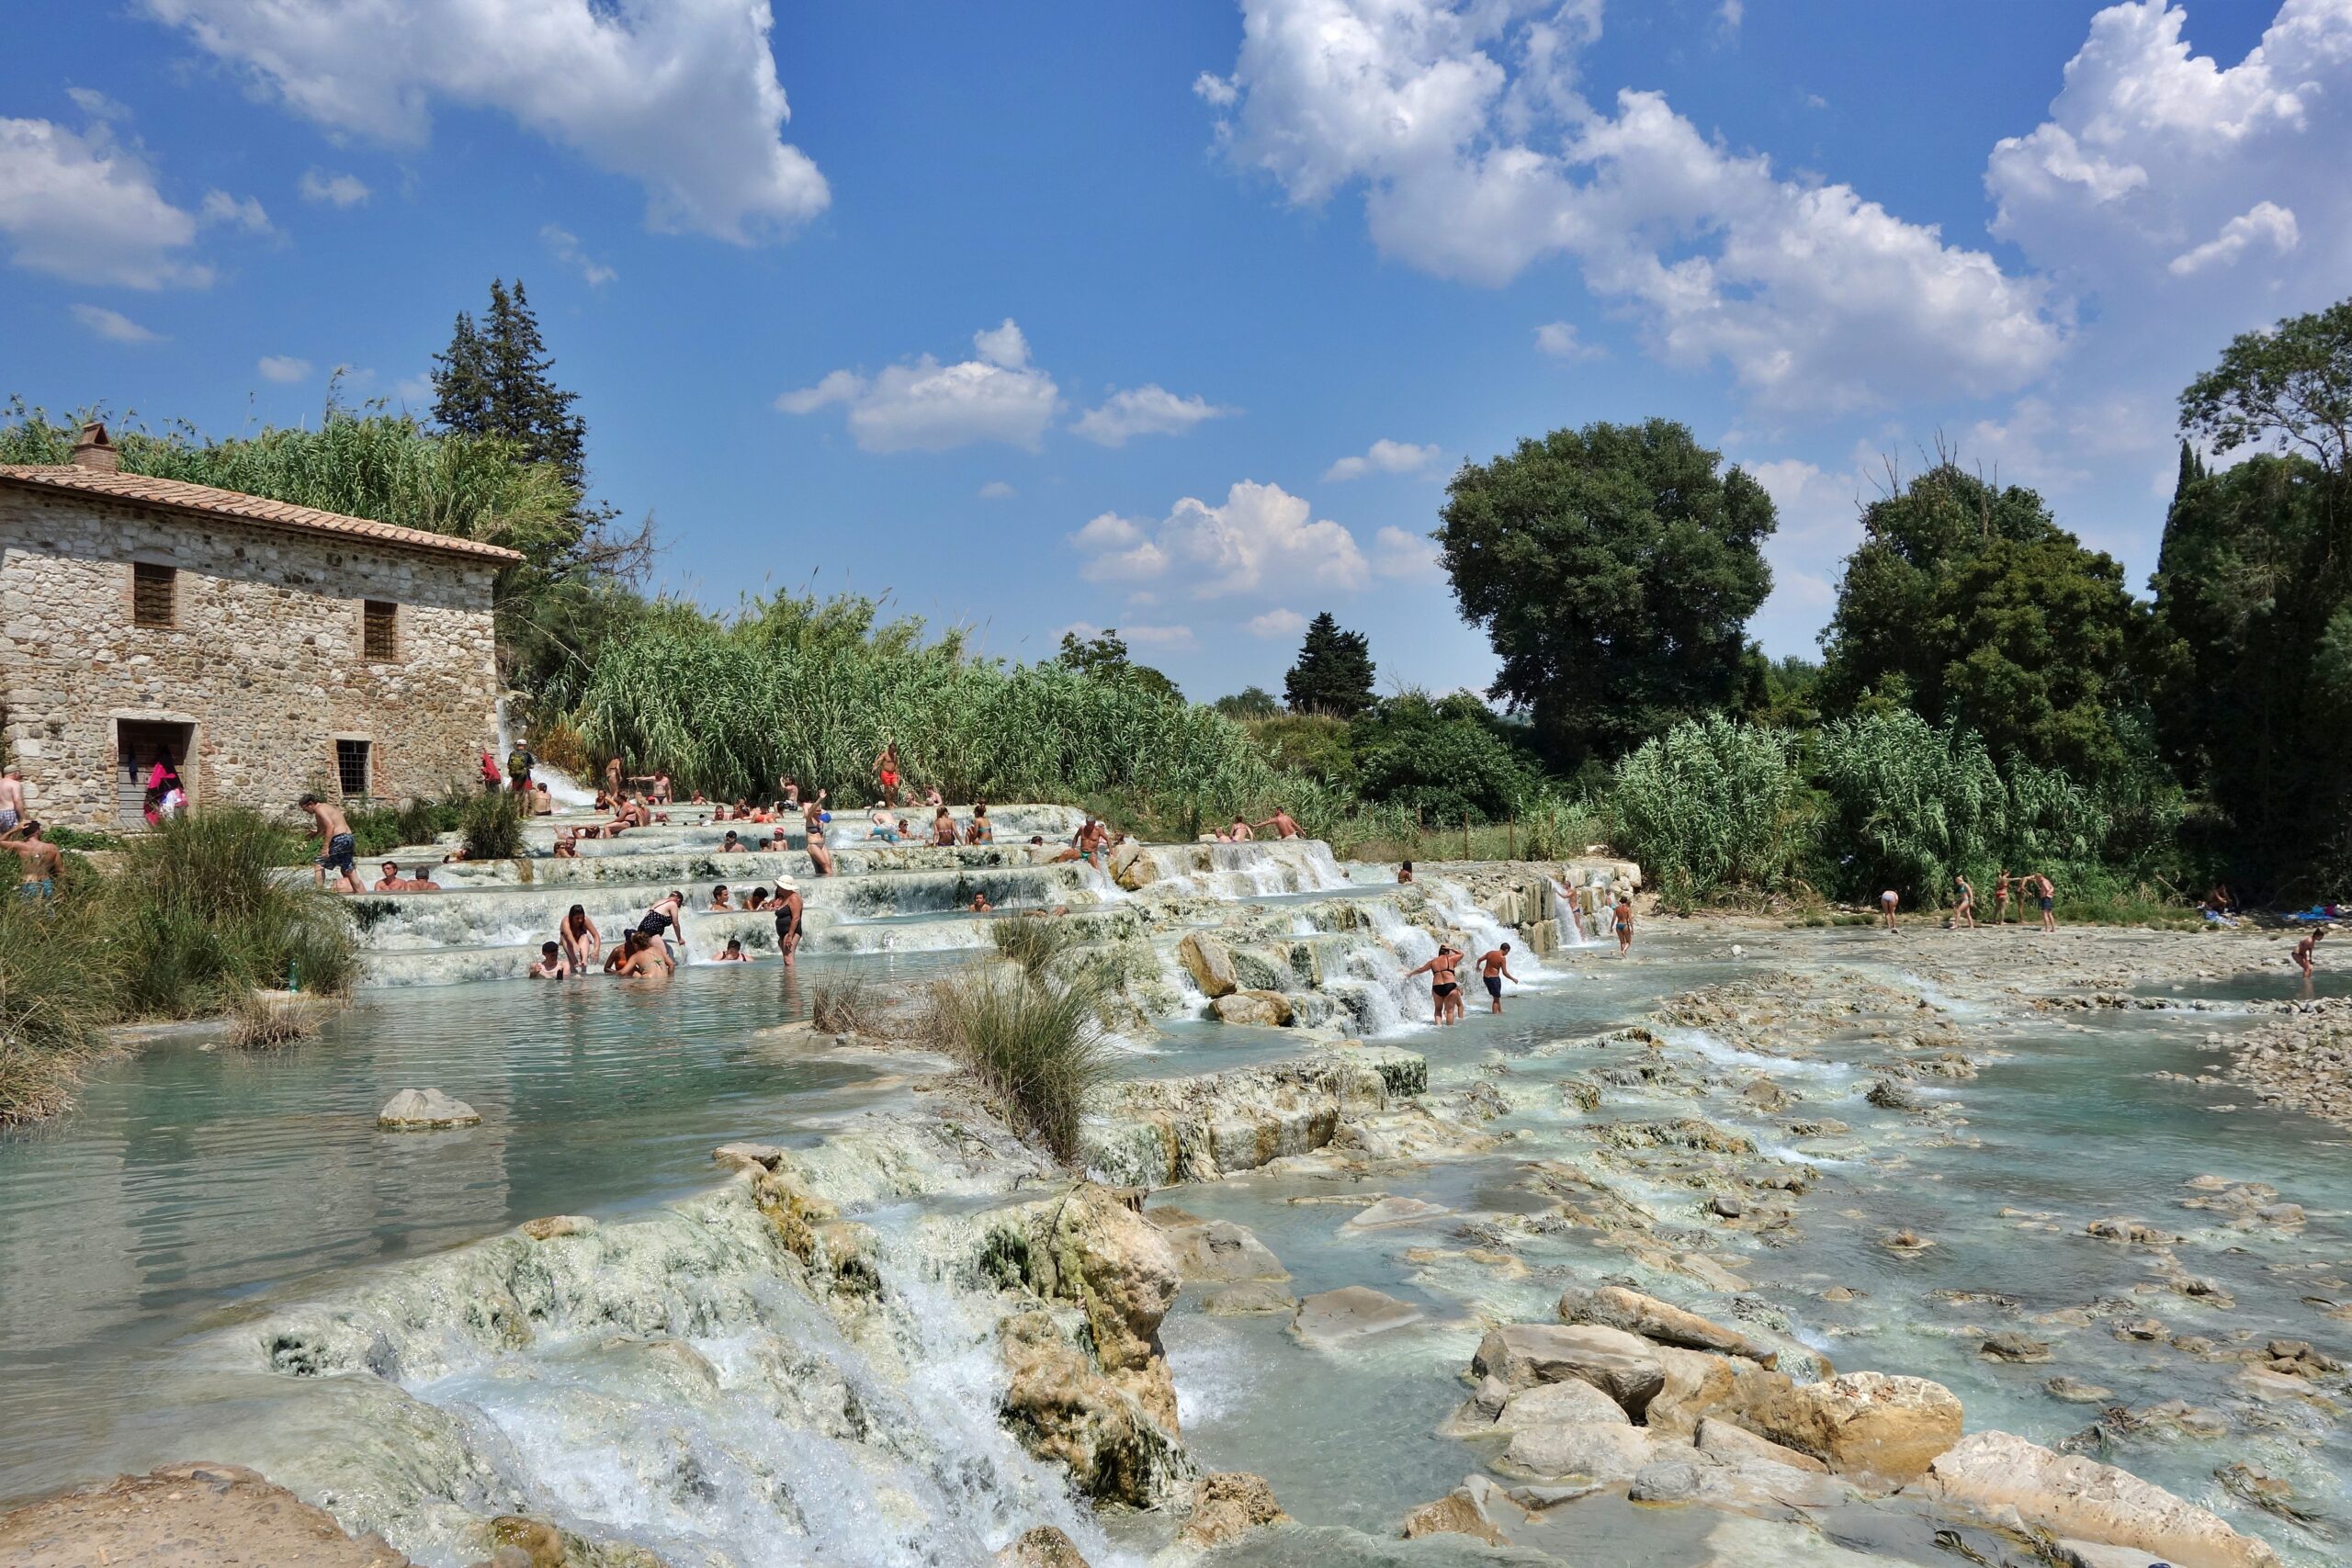 This hot spring in Italy is insanely popular for its serene environment. Check out the benefits that travelers can experience after visiting a hot spring like the one in Saturnia. 
pictured: the Saturnia hot spring with people enjoying the warm waters on a cloudy and sunny day